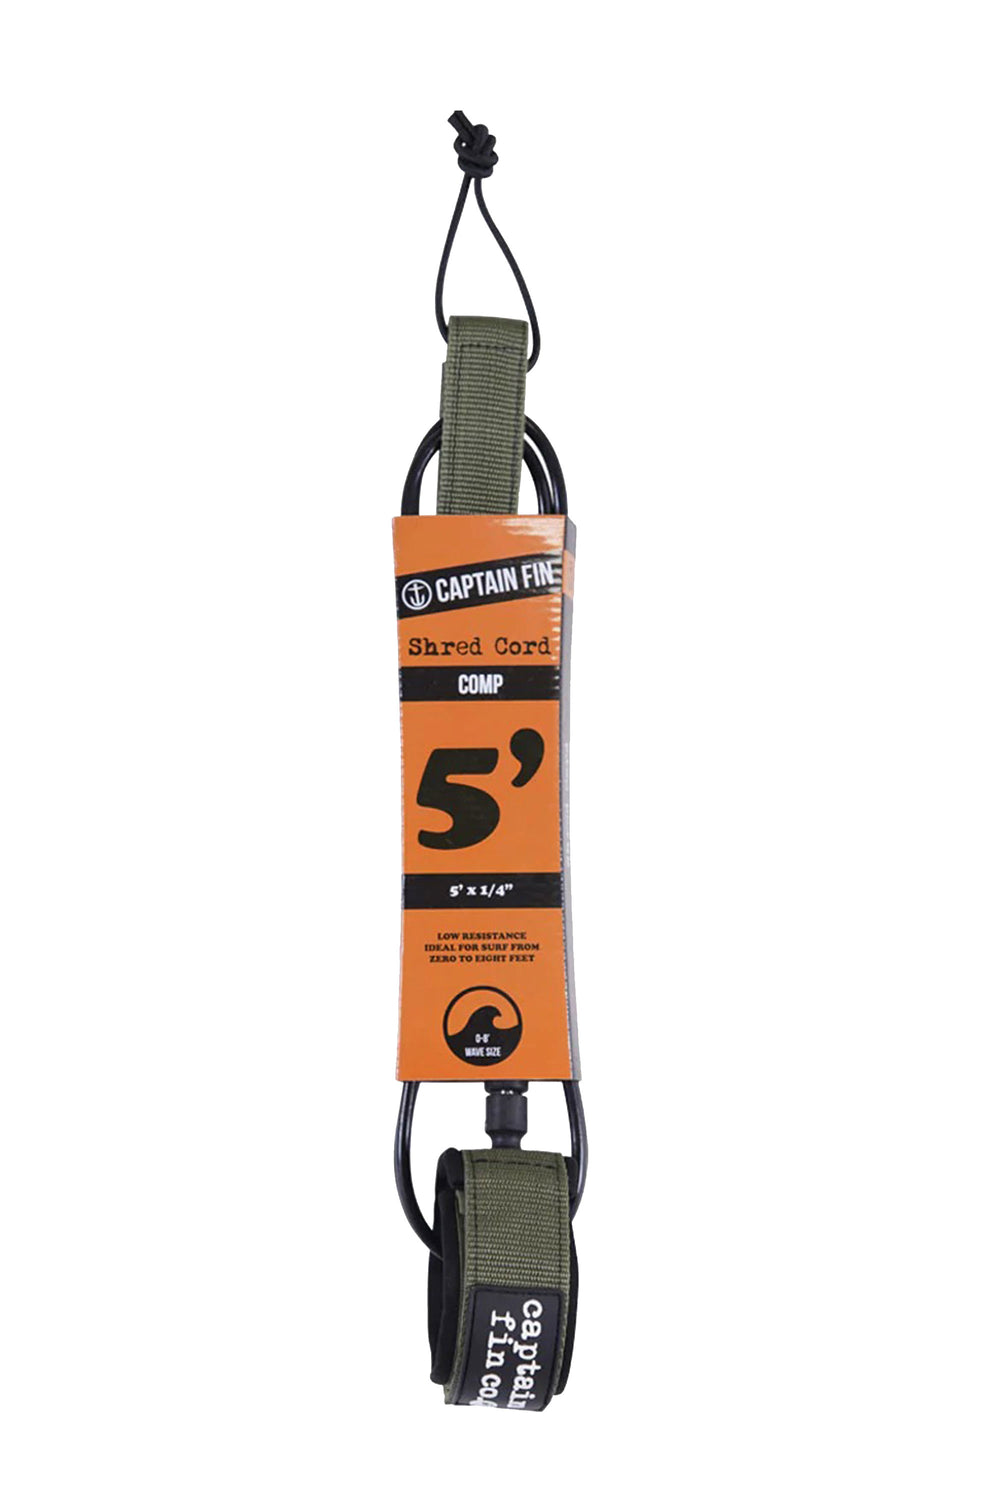 Pukas-Surf-Shop-Captain-Fin-leashes-Shred-Cord-5-army-1